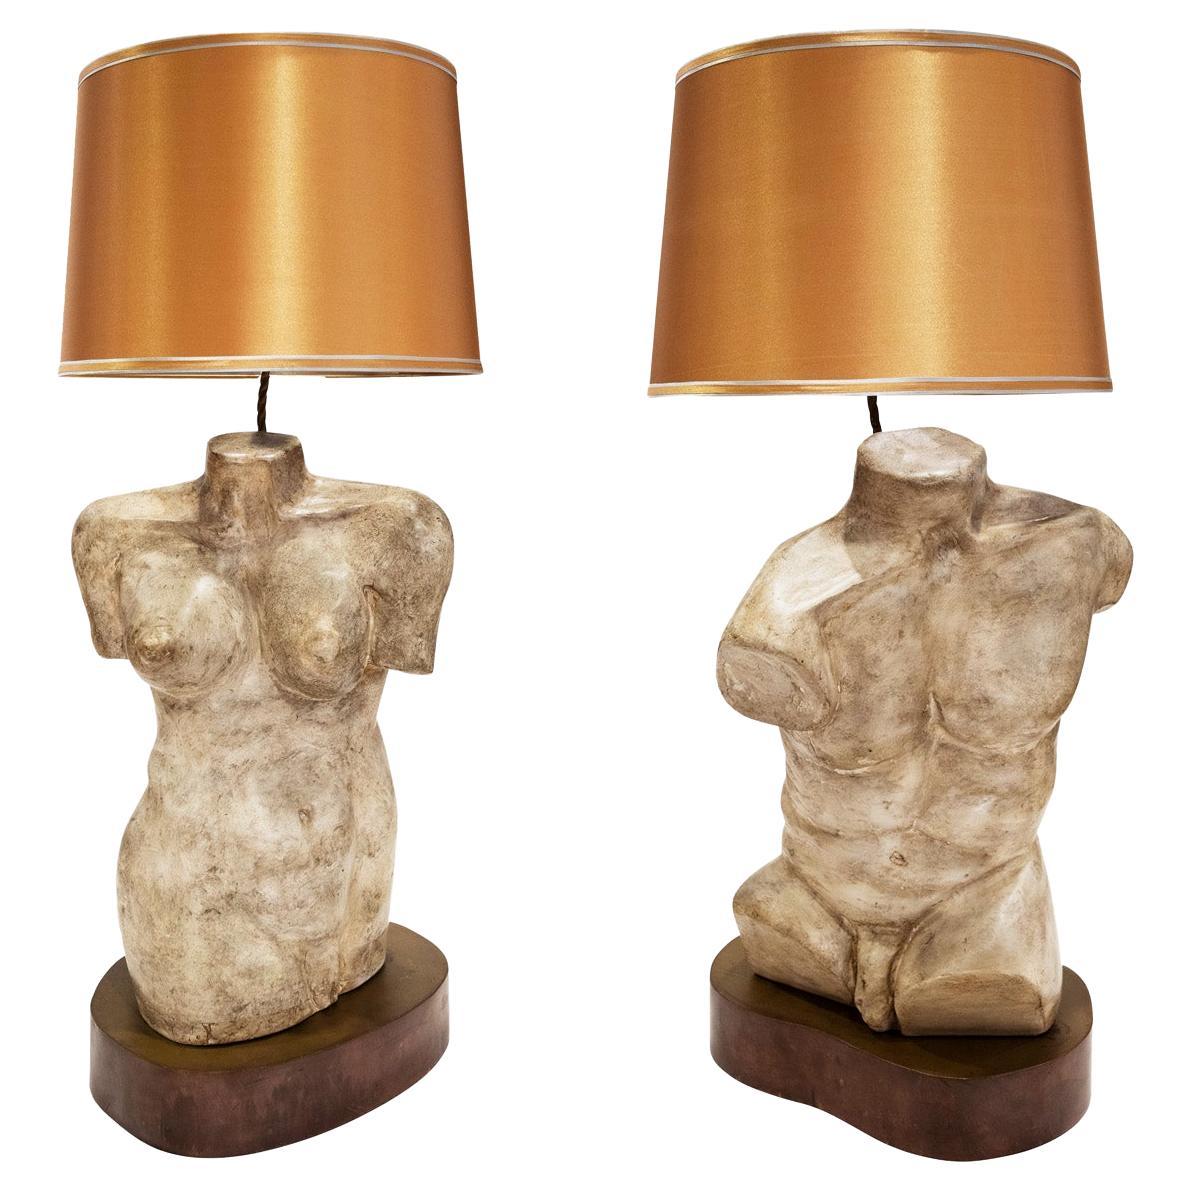 Philip & Kelvin Laverne Rare and Important Torso Table Lamps 1970s - Signed